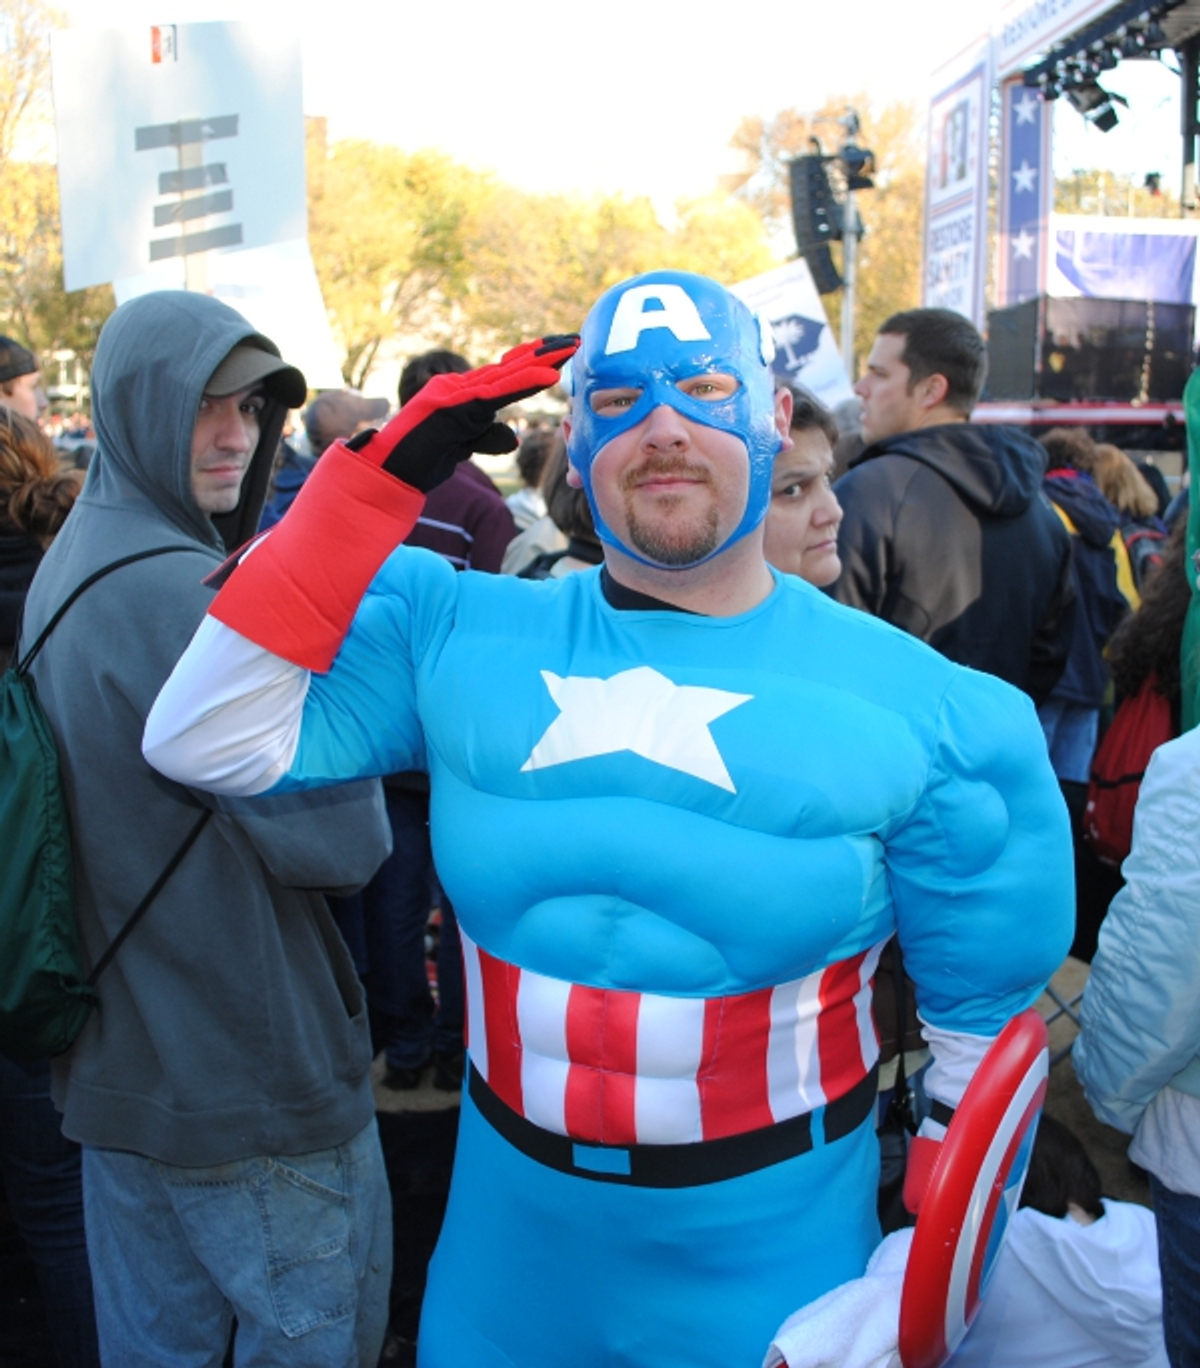 Captain America salutes reasonableness at the Rally to Restore Sanity in Washington, D.C. on October 30, 2010  